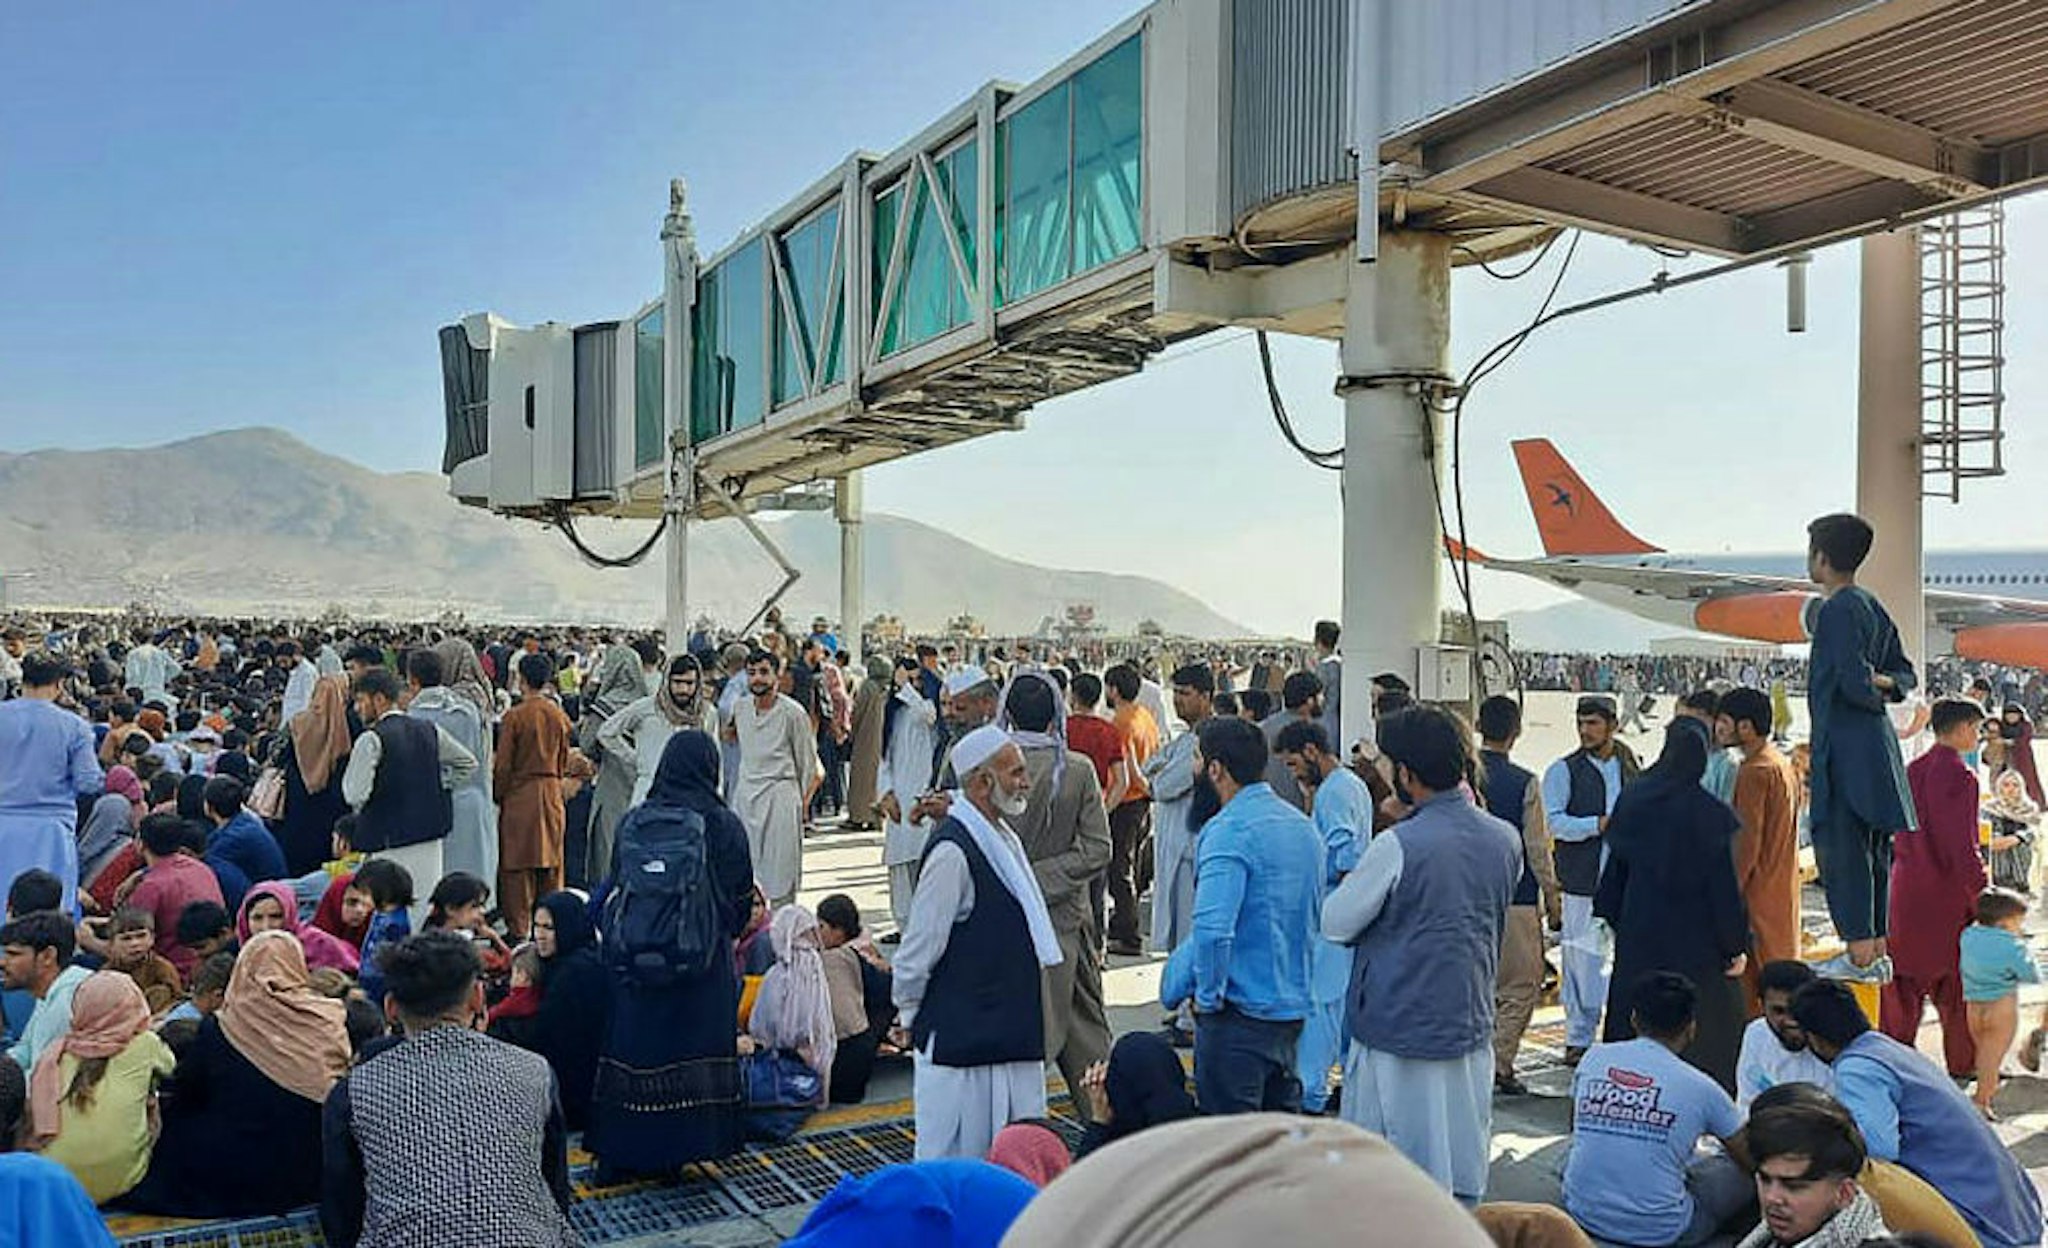 TOPSHOT - Afghans crowd at the tarmac of the Kabul airport on August 16, 2021, to flee the country as the Taliban were in control of Afghanistan after President Ashraf Ghani fled the country and conceded the insurgents had won the 20-year war.